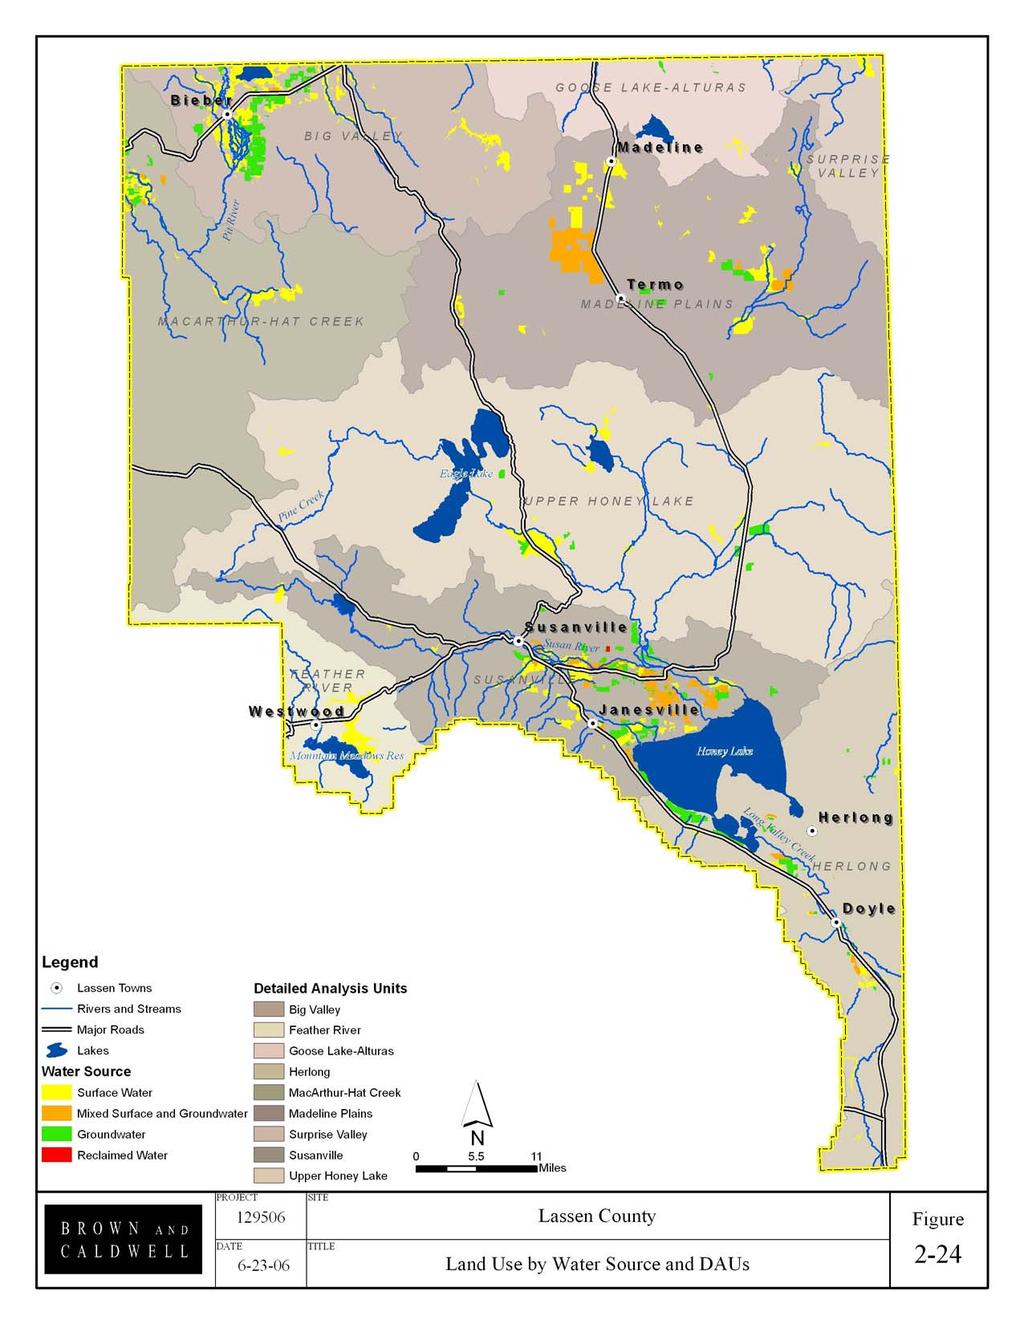 Year Land Use Survey Data Note: Water source data represents published information.